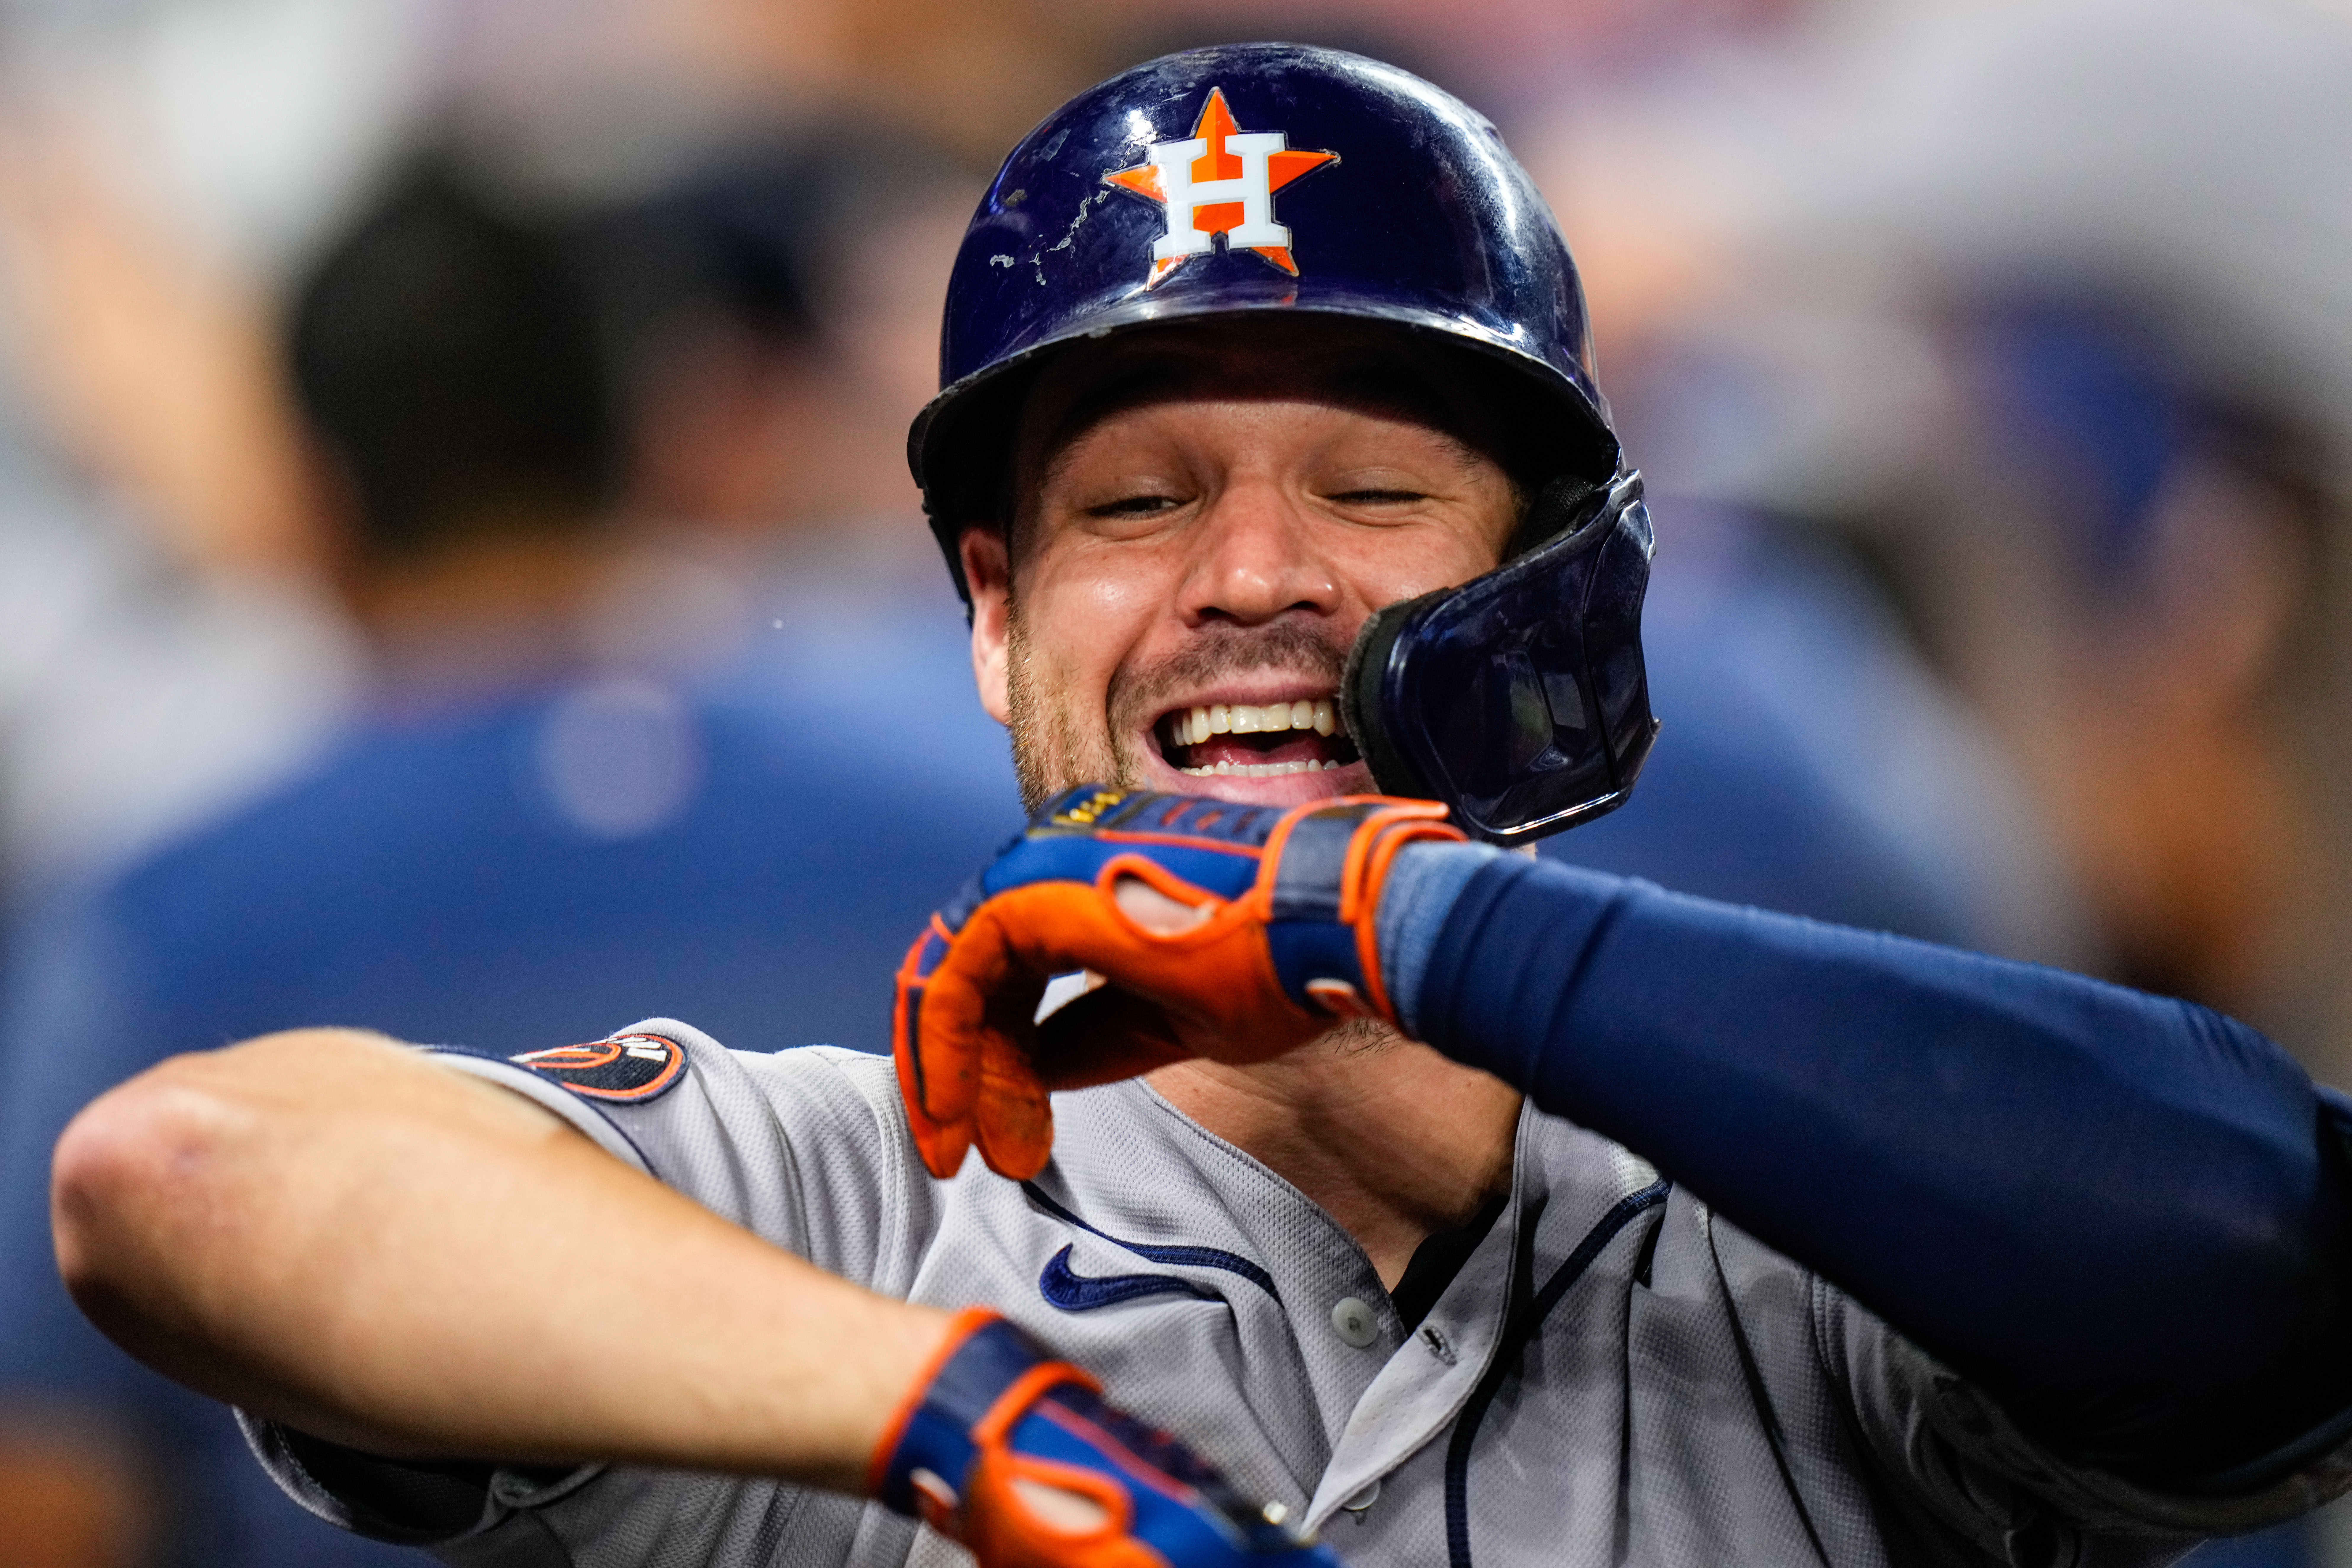 Bregman, Tucker, McCormick homer in 1st inning as the Astros rout Marlins  12-5 National News - Bally Sports